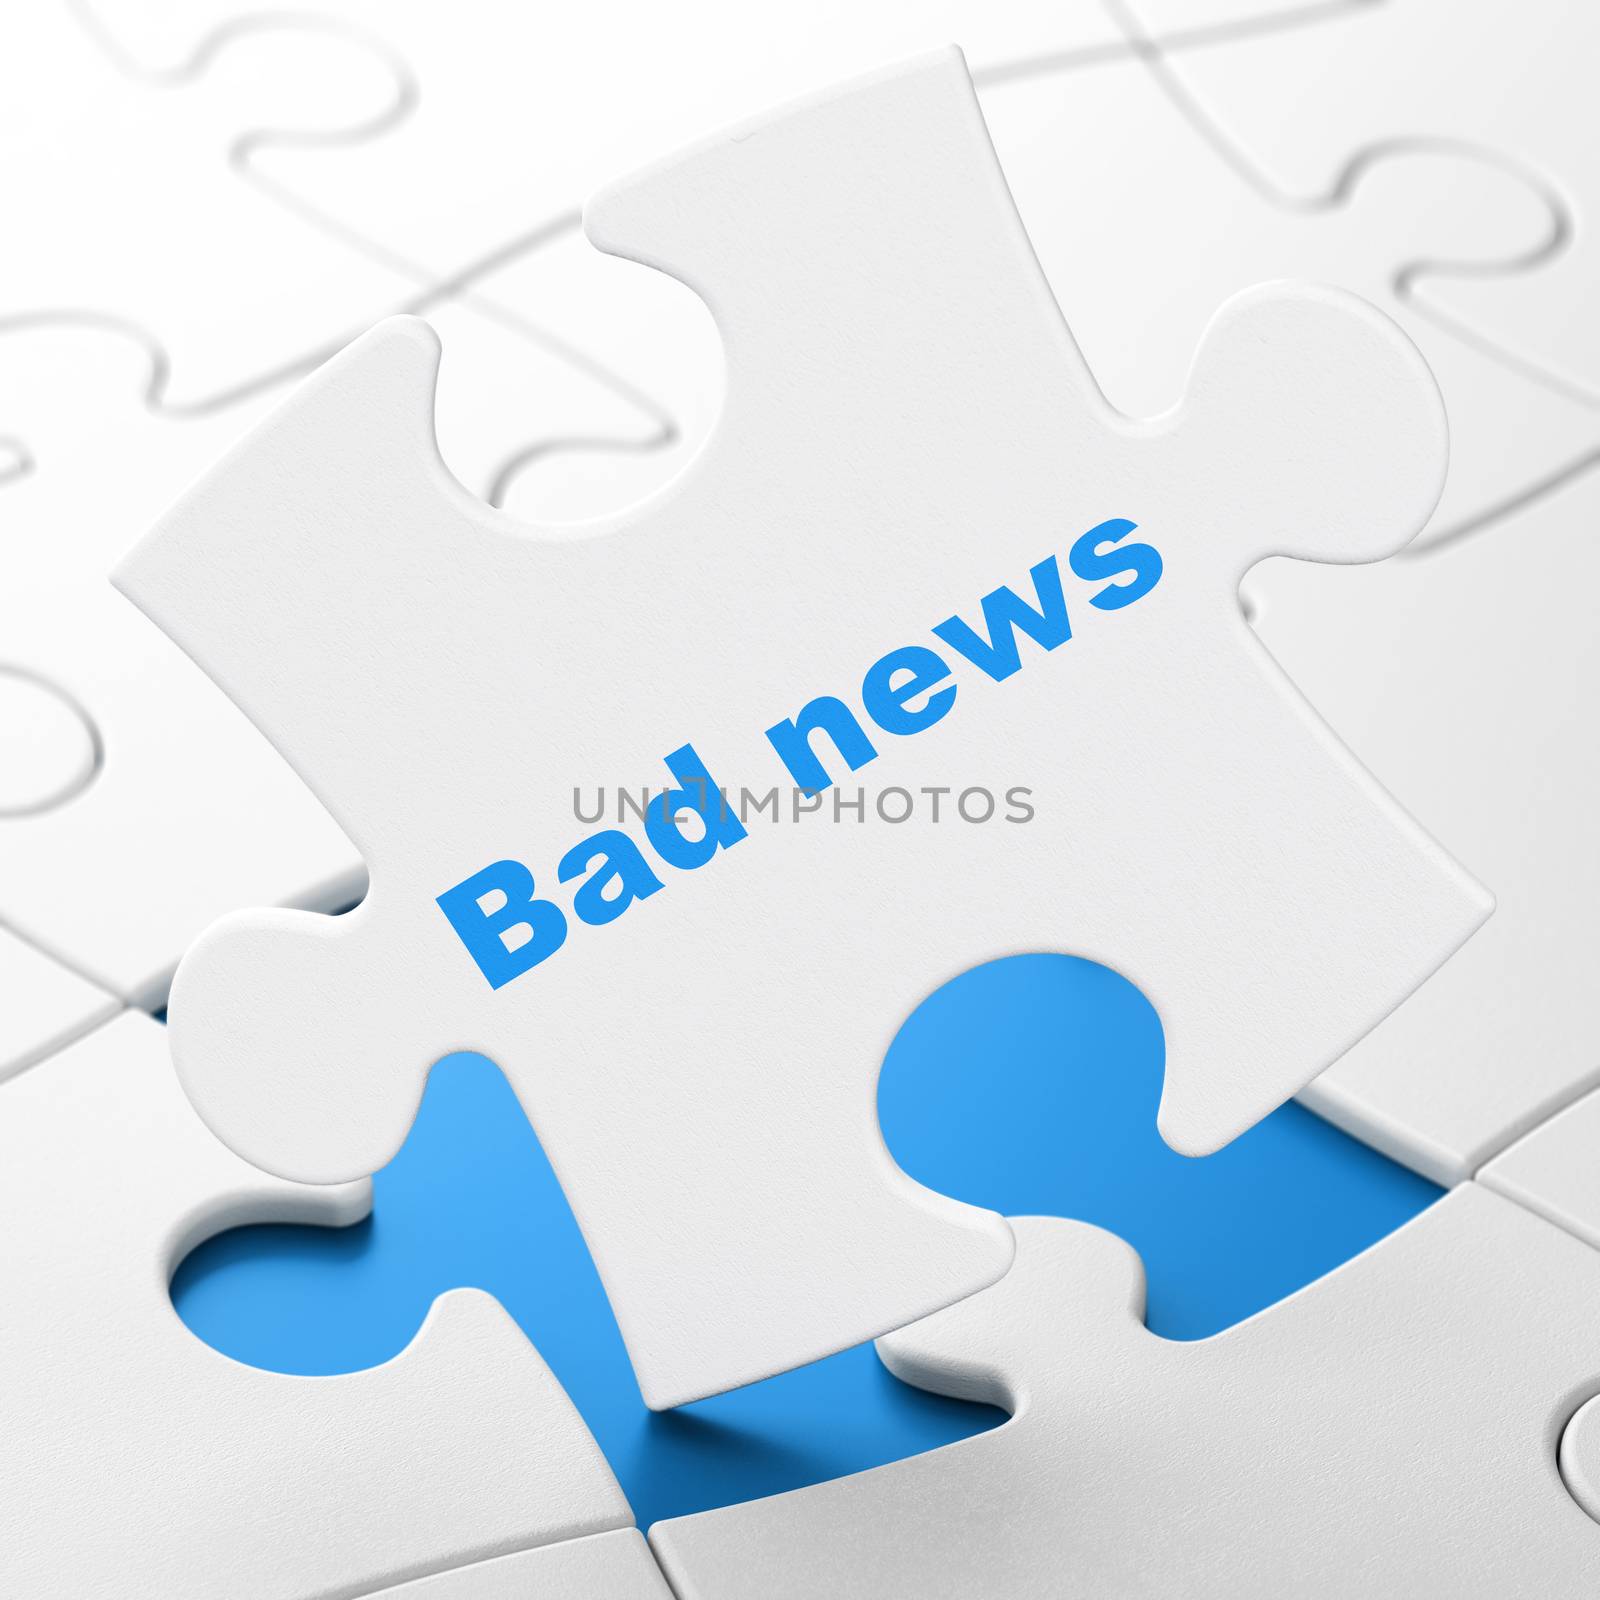 News concept: Bad News on White puzzle pieces background, 3D rendering